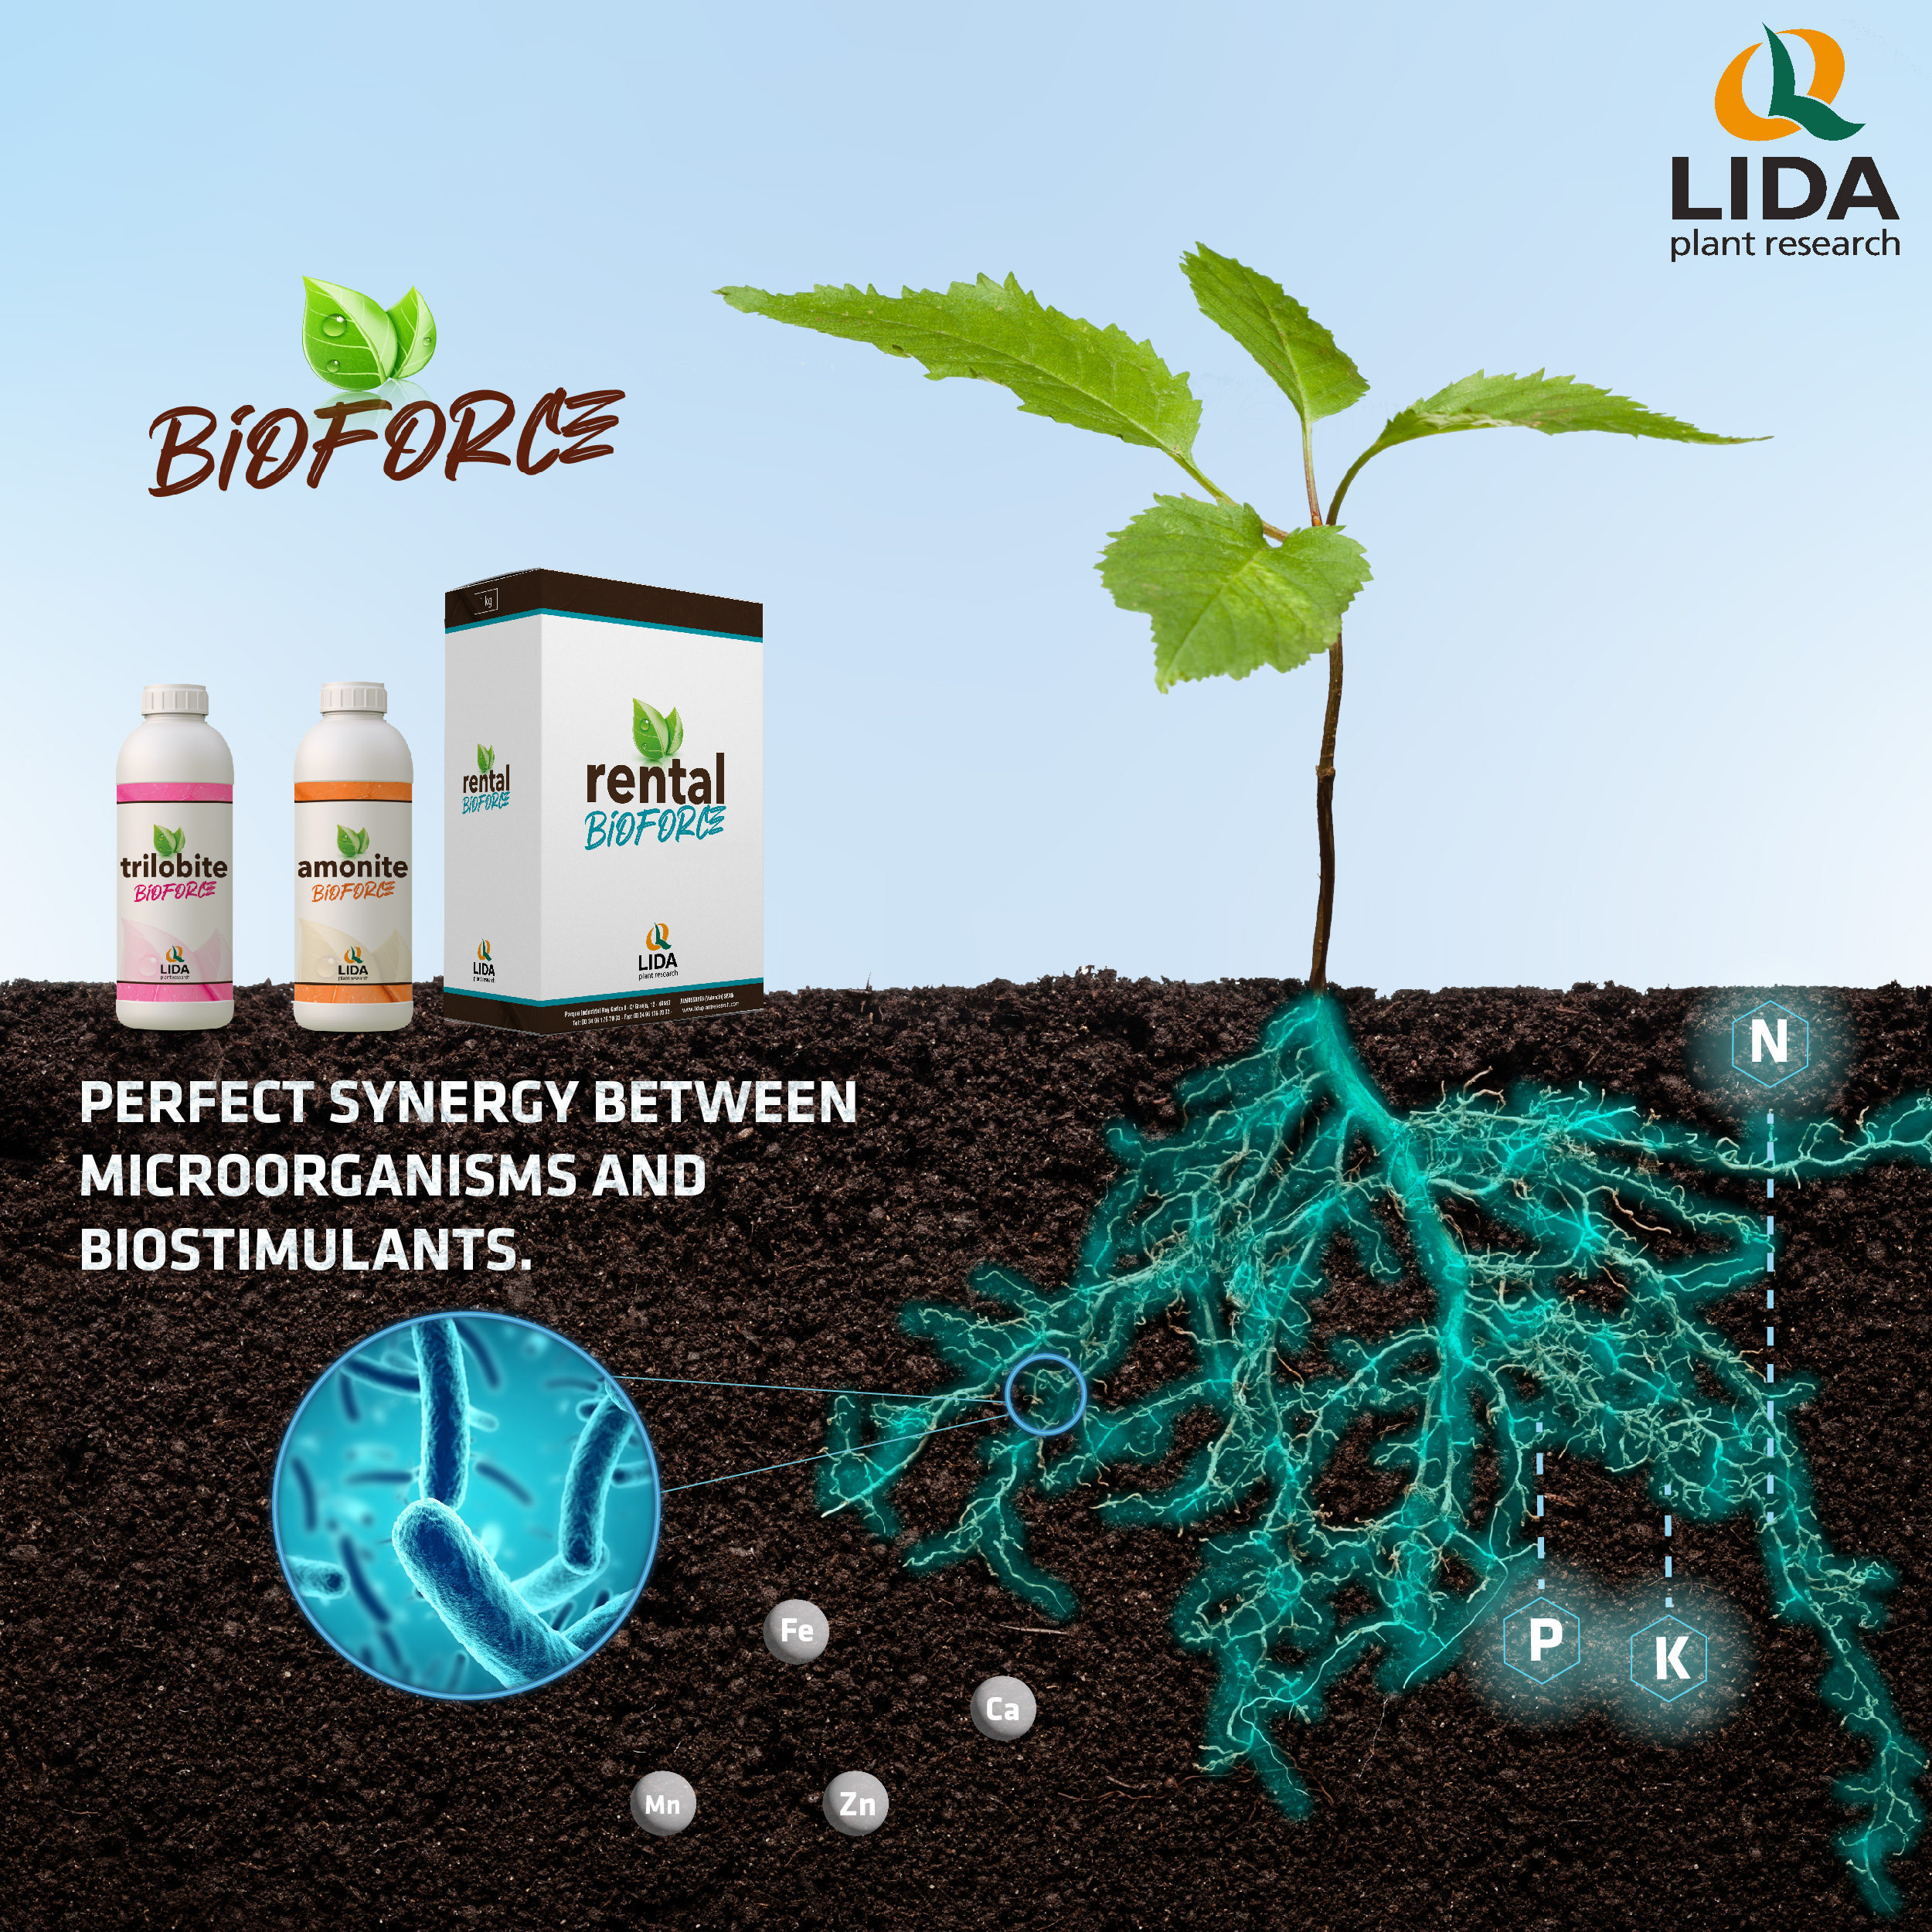 LIDA Plant Research launches the BIOFORCE range based on microorganisms and biostimulant substances.